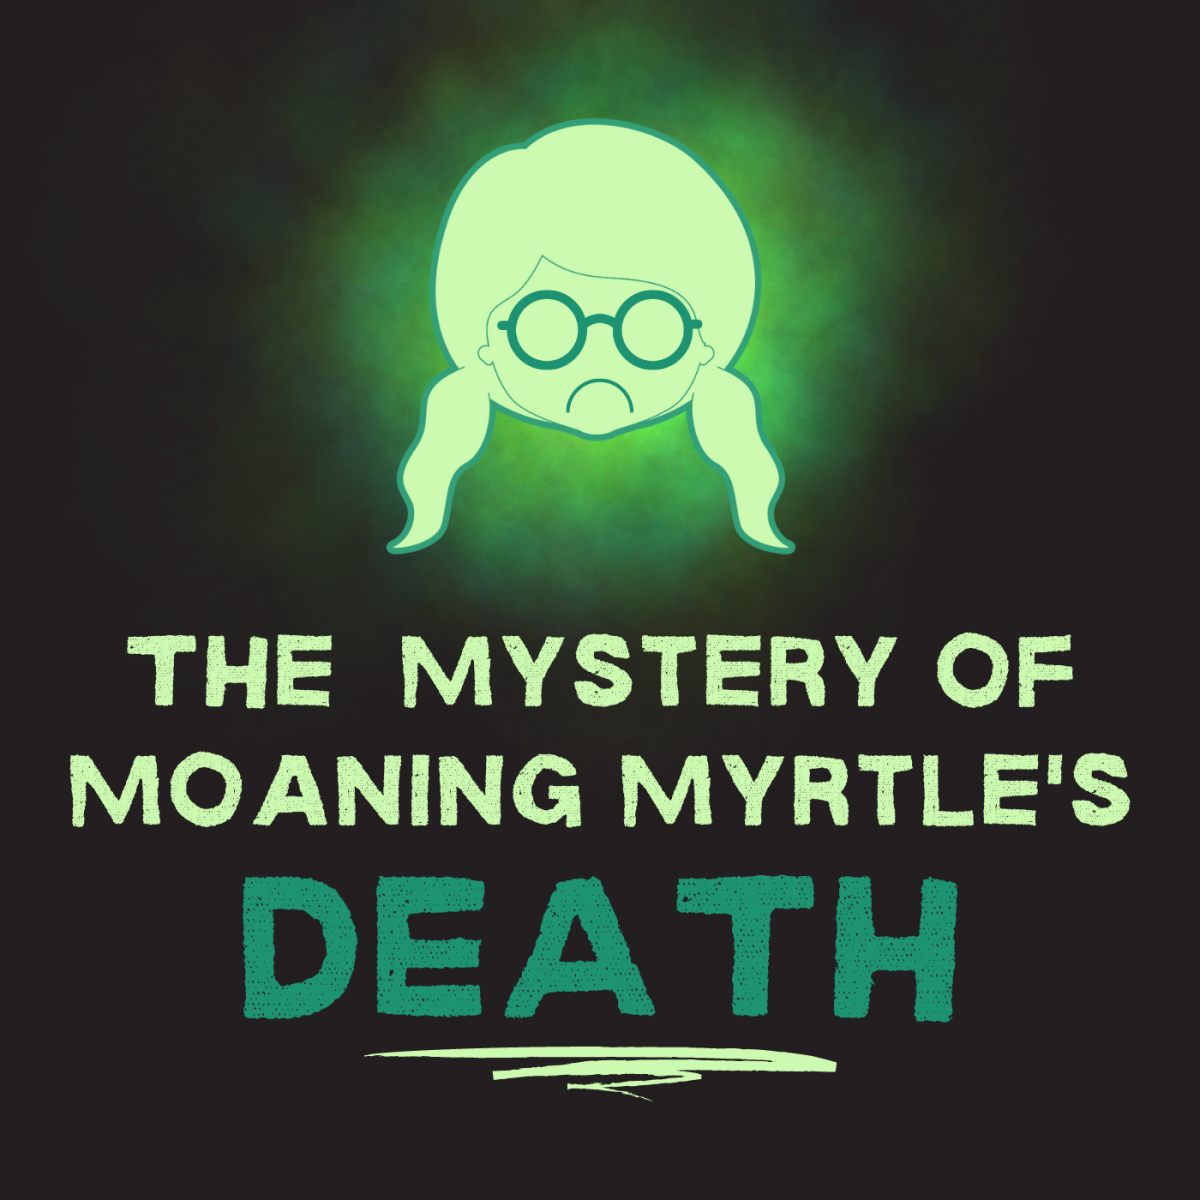 Why did Myrtle have to die? Why did it take Dumbledore so long to find the Chamber of Secrets and realise the monster was a basilisk? I share my theories.